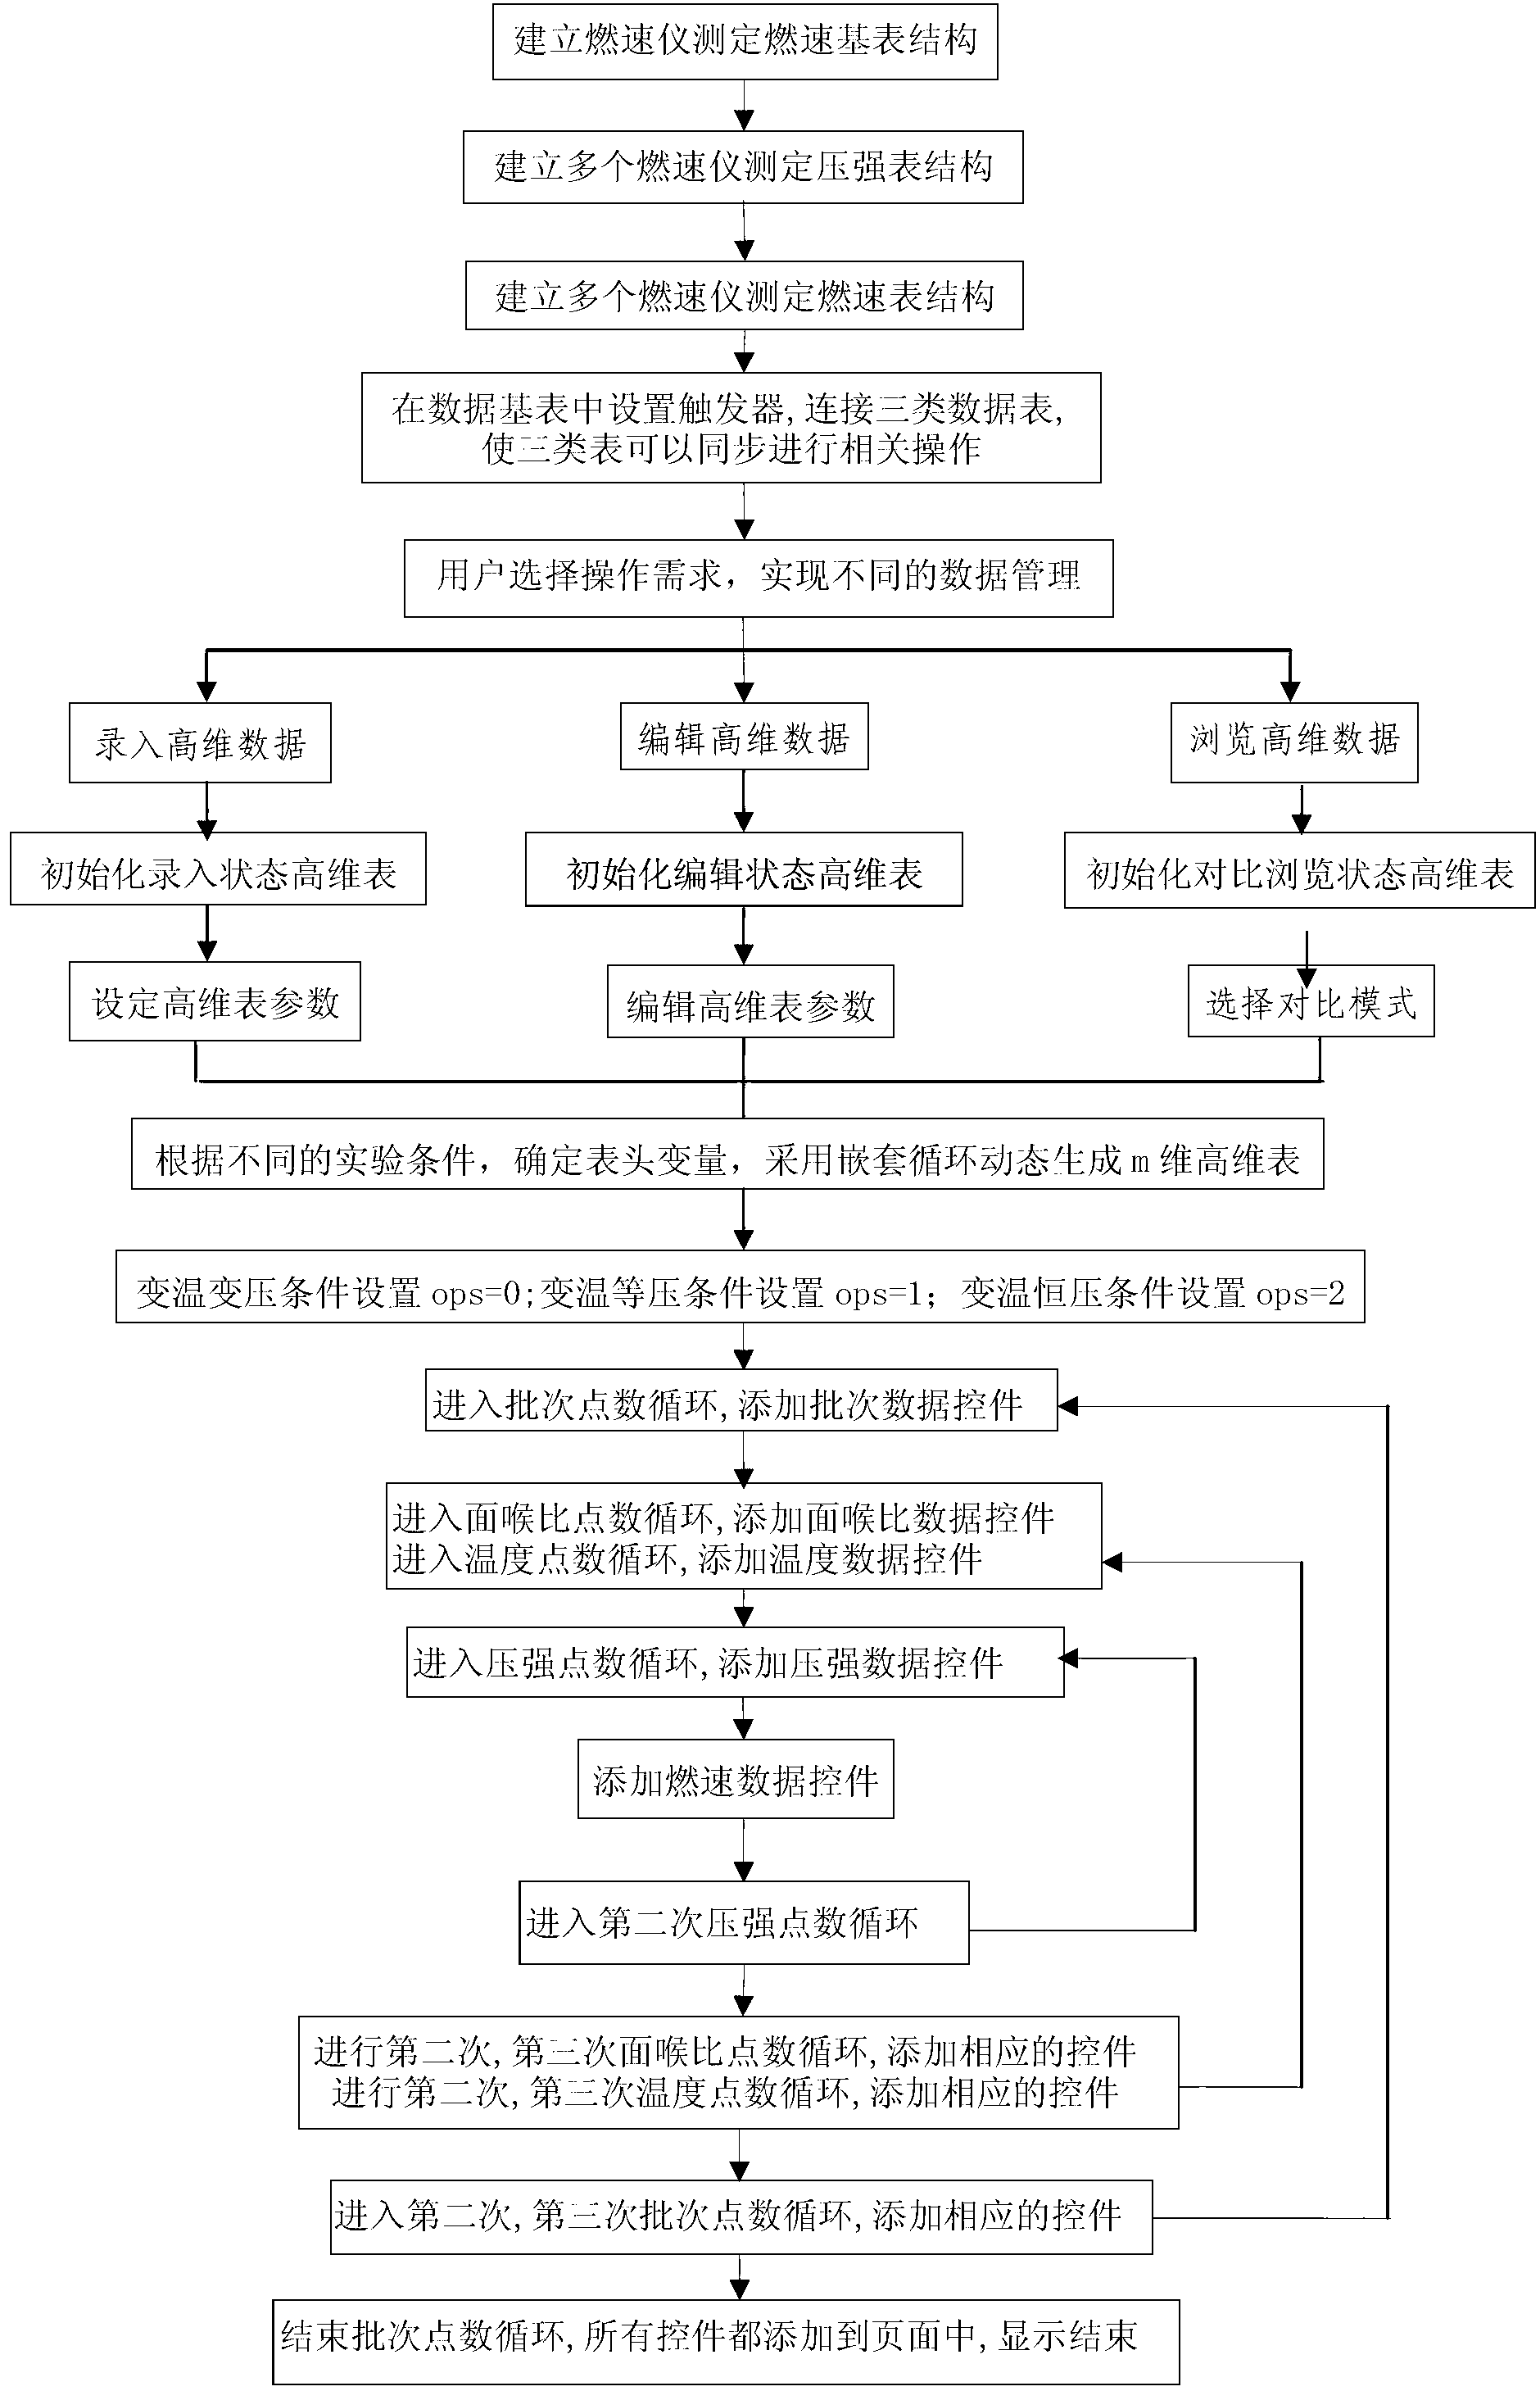 Method for managing high dimensional data and displaying associated data dynamically and contrastively